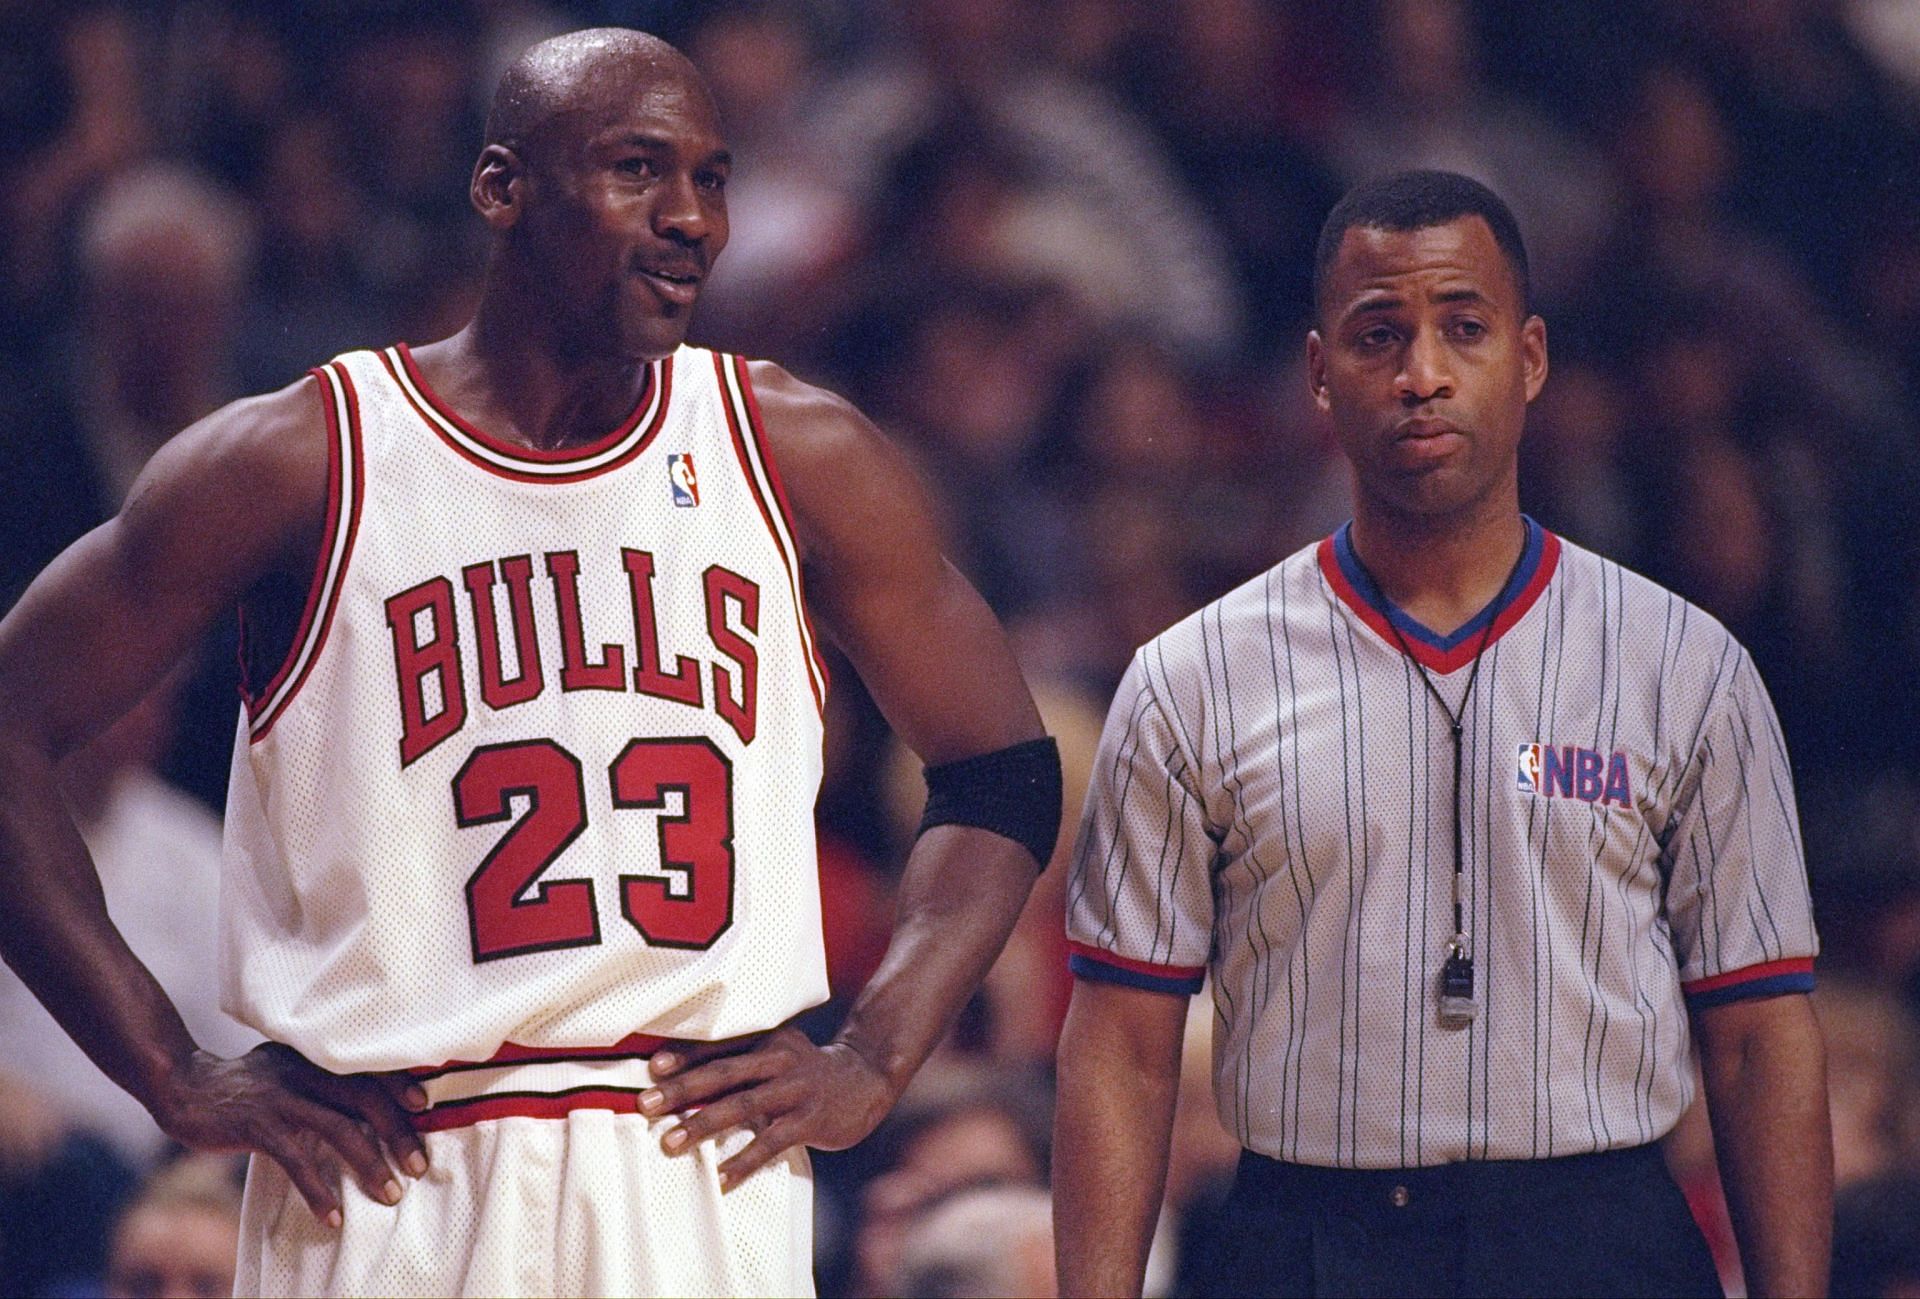 Michael Jordan of the Chicago Bulls confers with an official